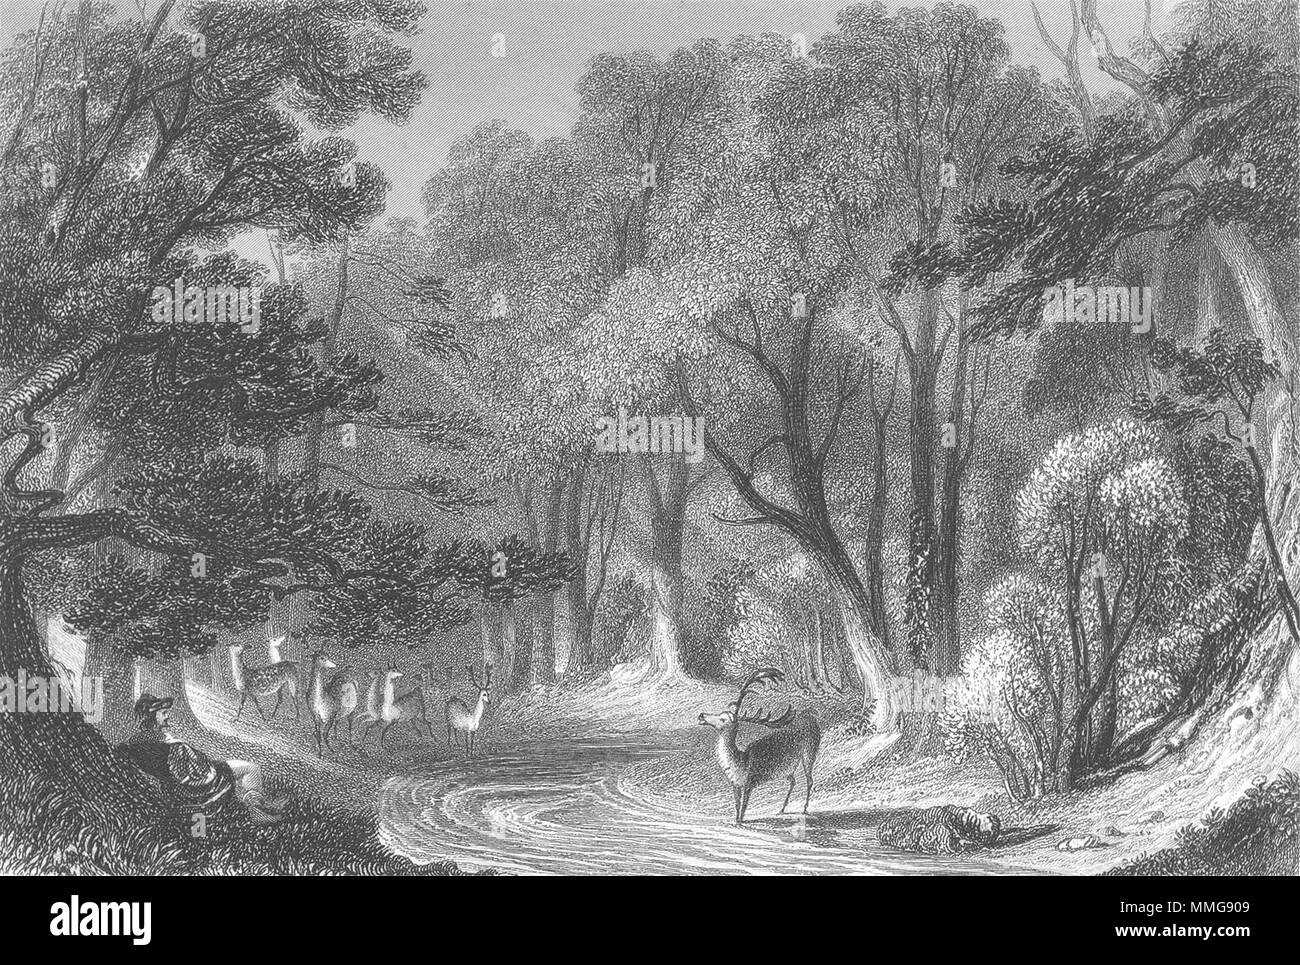 WARCS. Forest of Arden. Sargent Deer 1846 antica vintage delle immagini di stampa Foto Stock